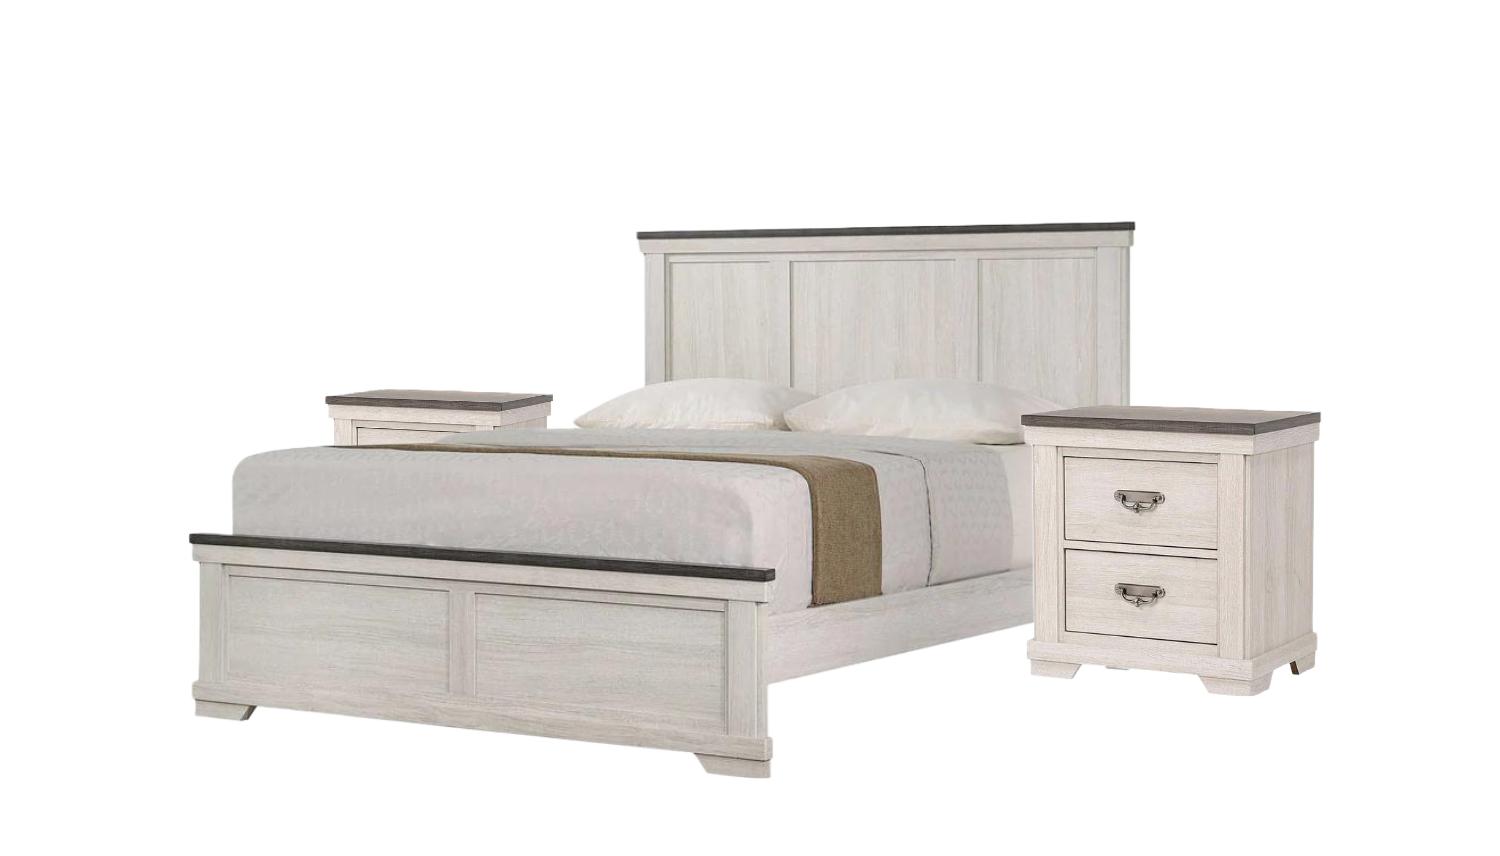 Rustic, Farmhouse Panel Bedroom Set Leighton B8180-F-Bed-3pcs in Antique White 